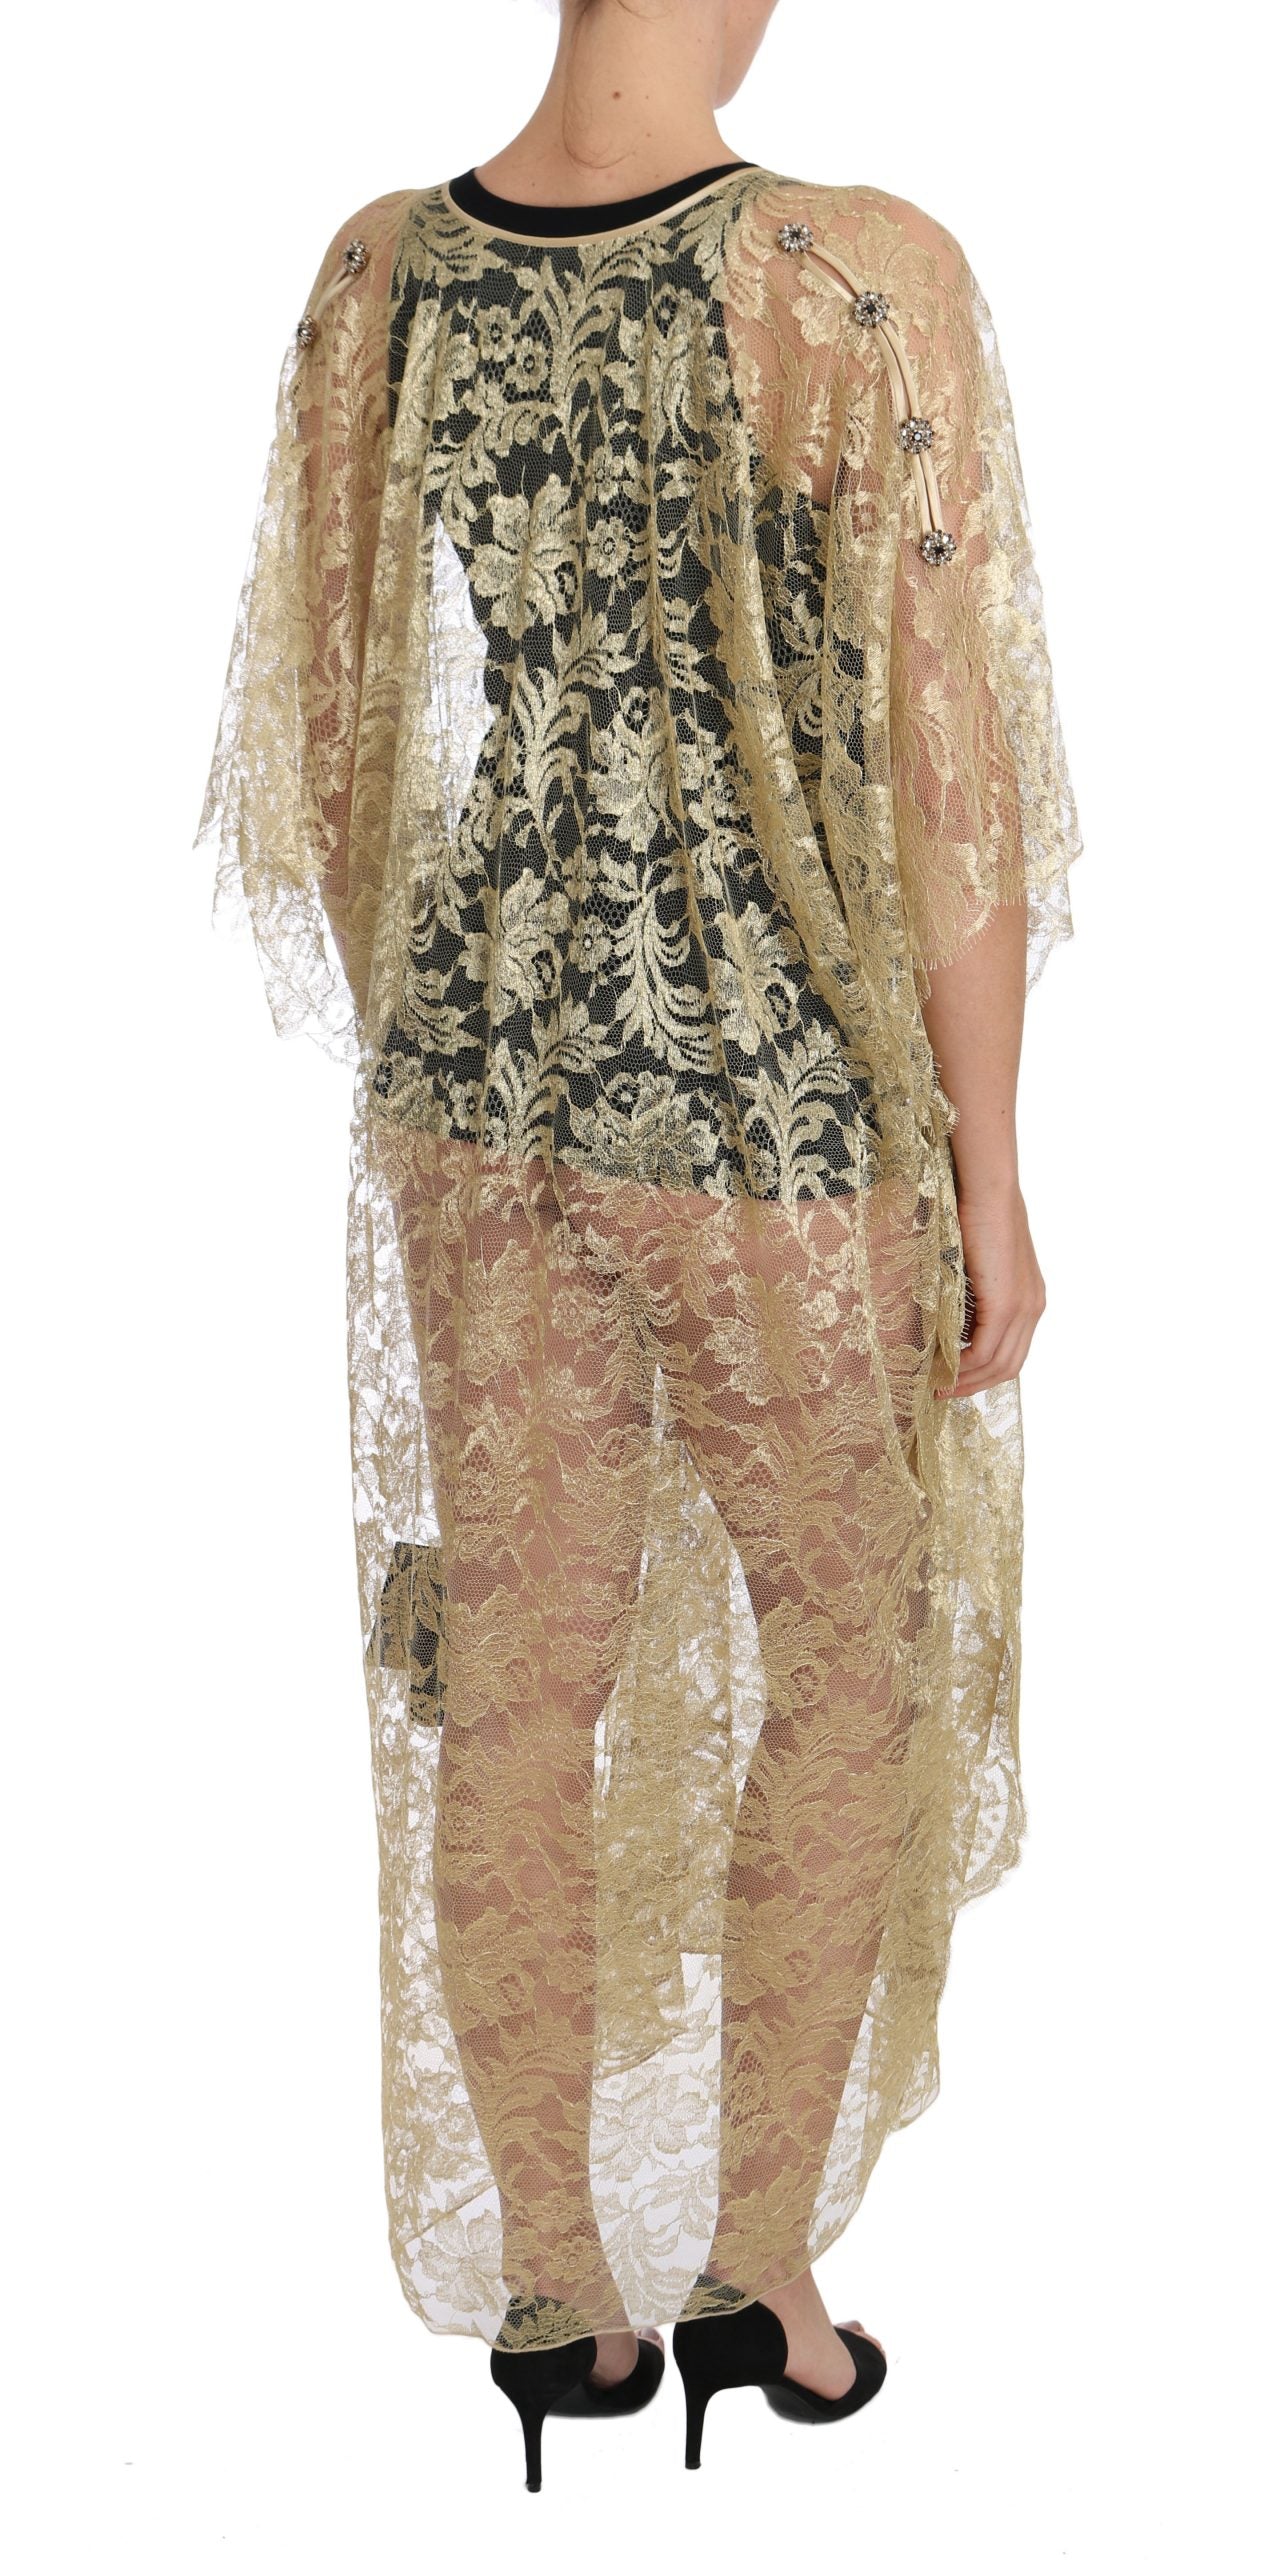 Gold Floral Lace Crystal Gown Cape Dress